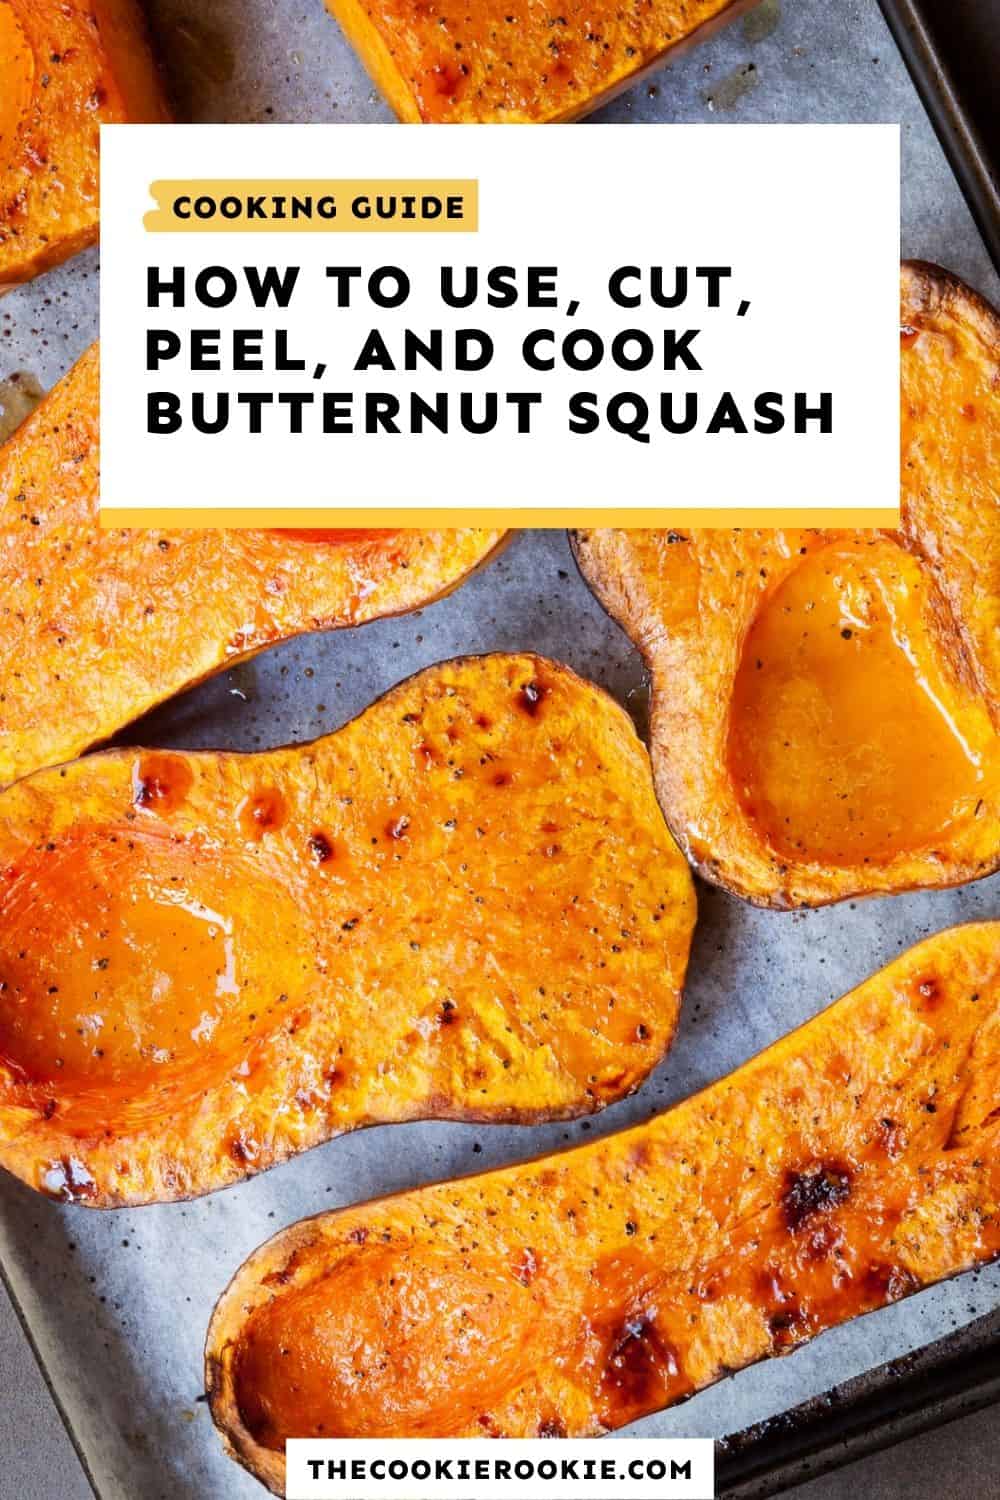 https://www.thecookierookie.com/wp-content/uploads/2021/03/how-to-cut-butternut-squash.jpg